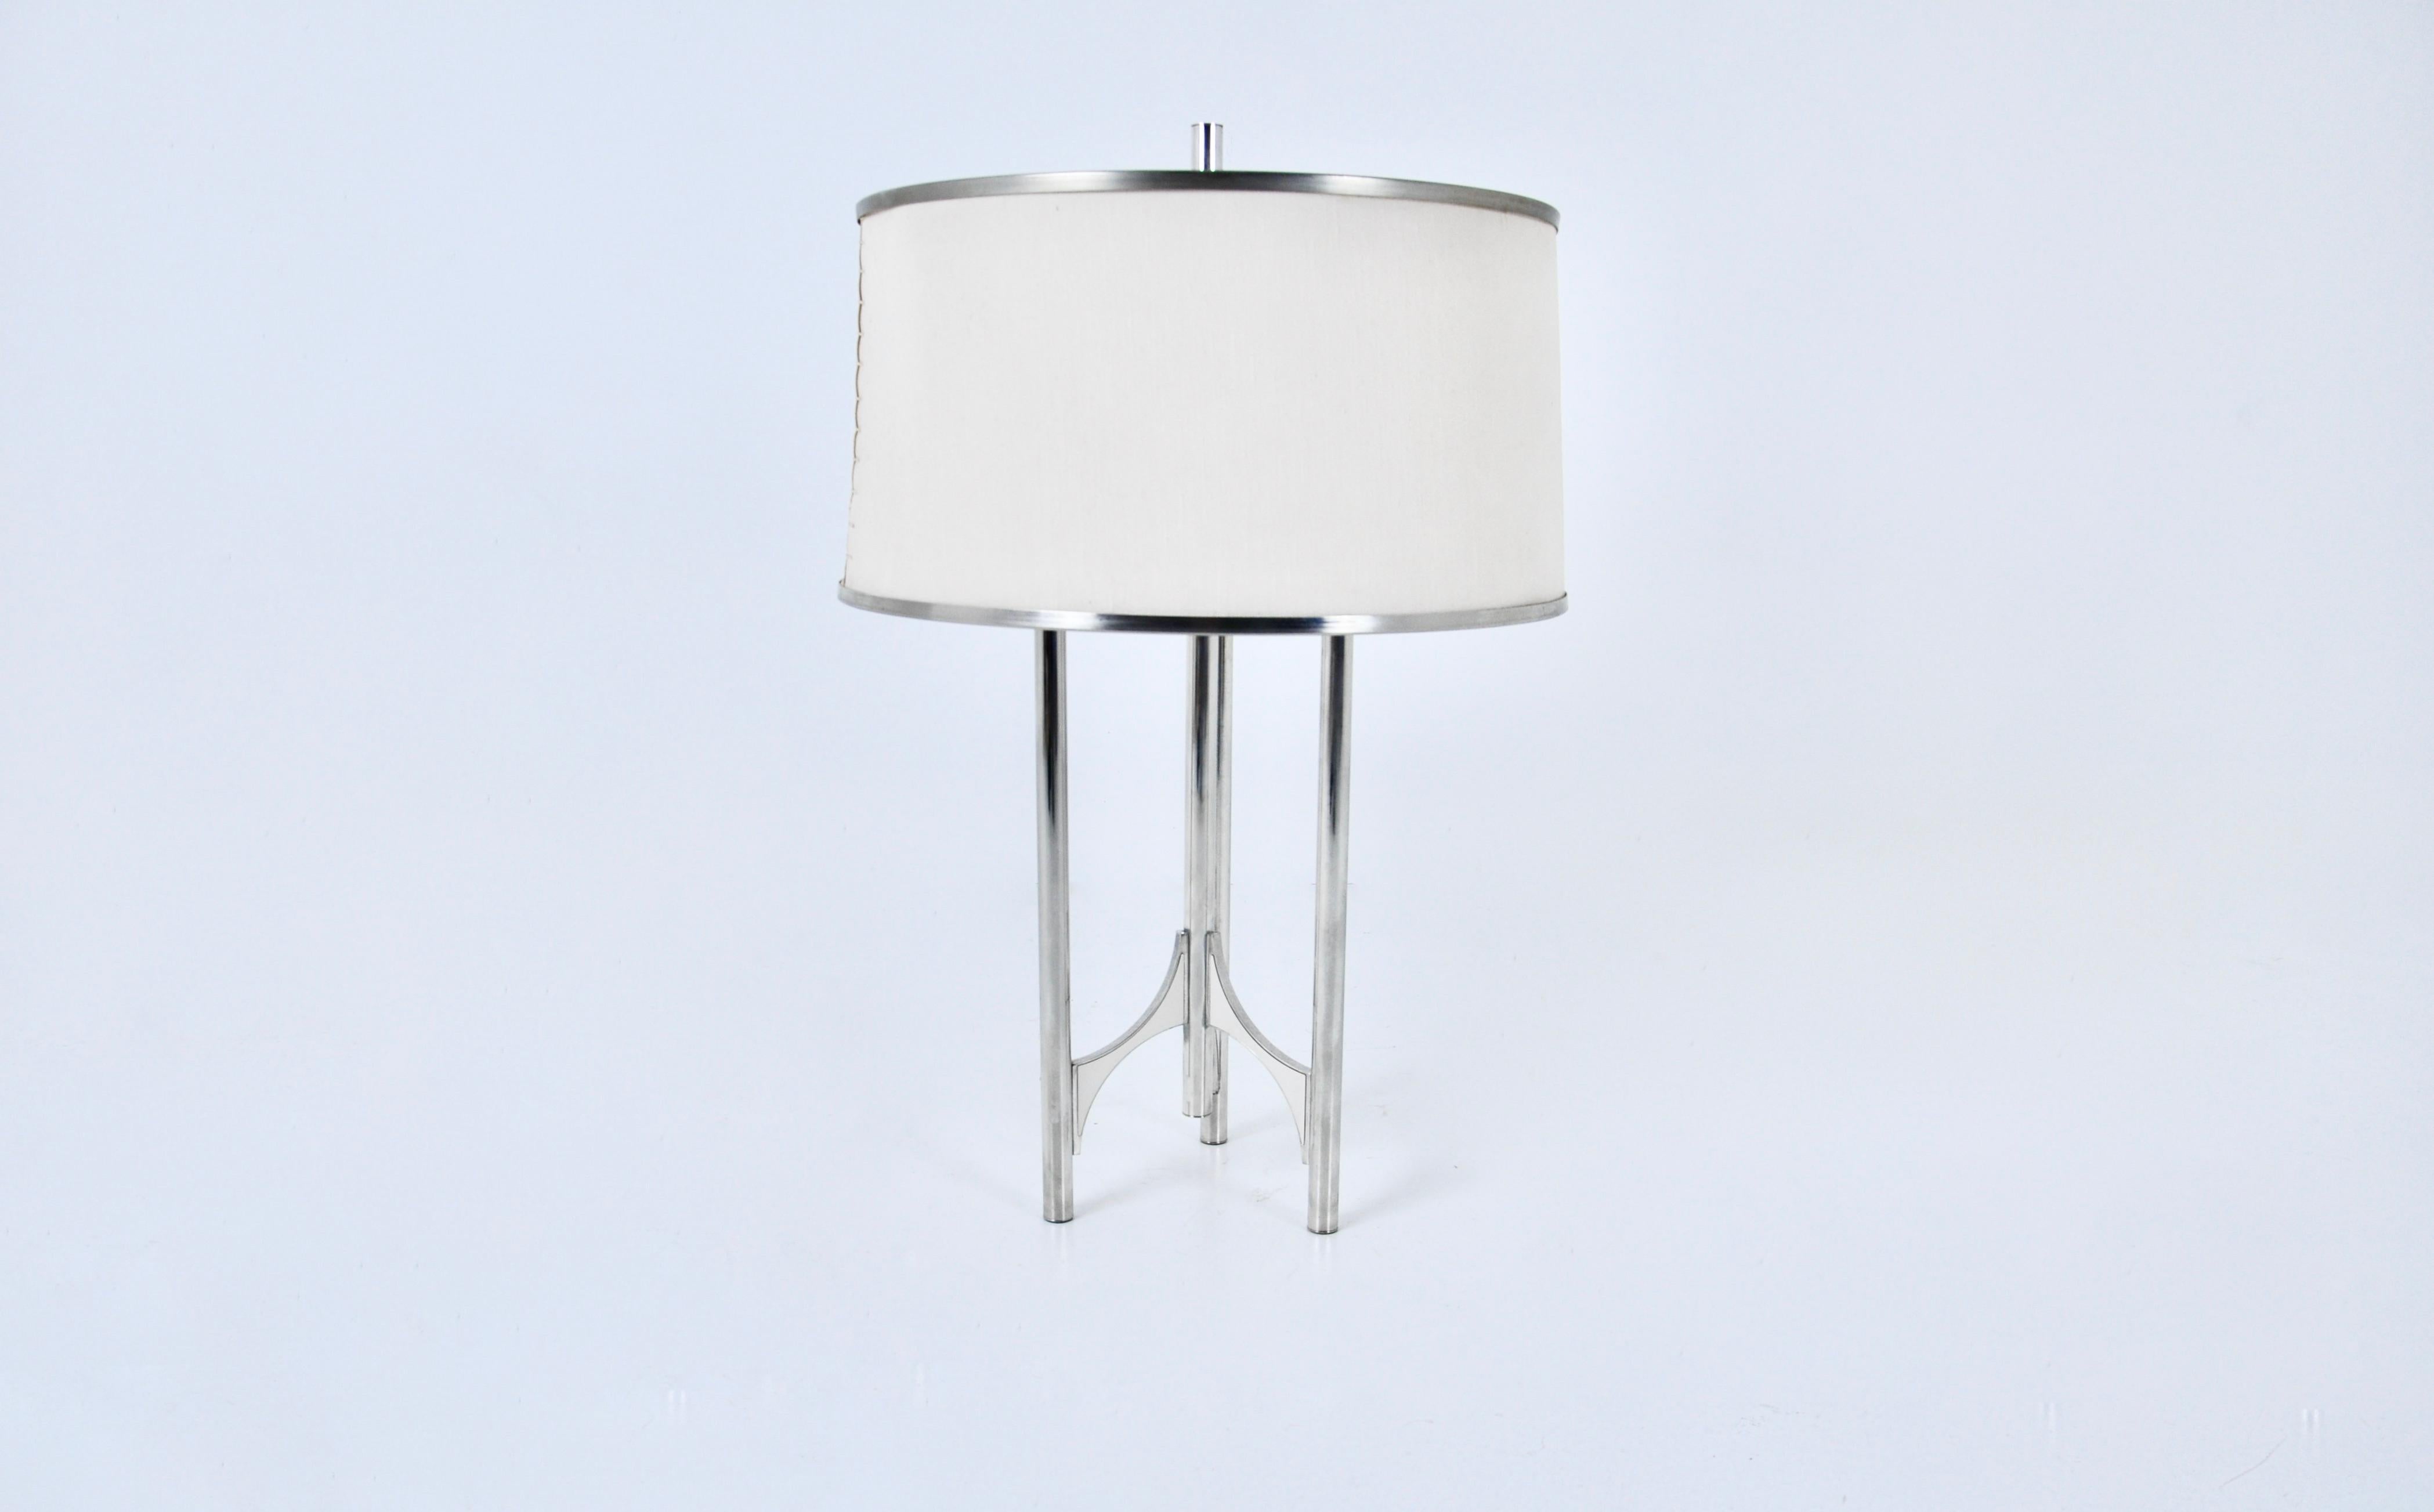 Metal lamp with metal shade and hand-sewn fabric. Stamped Sciolari on the top of the lamp and on the socket. Wear due to time and age of the lamp.